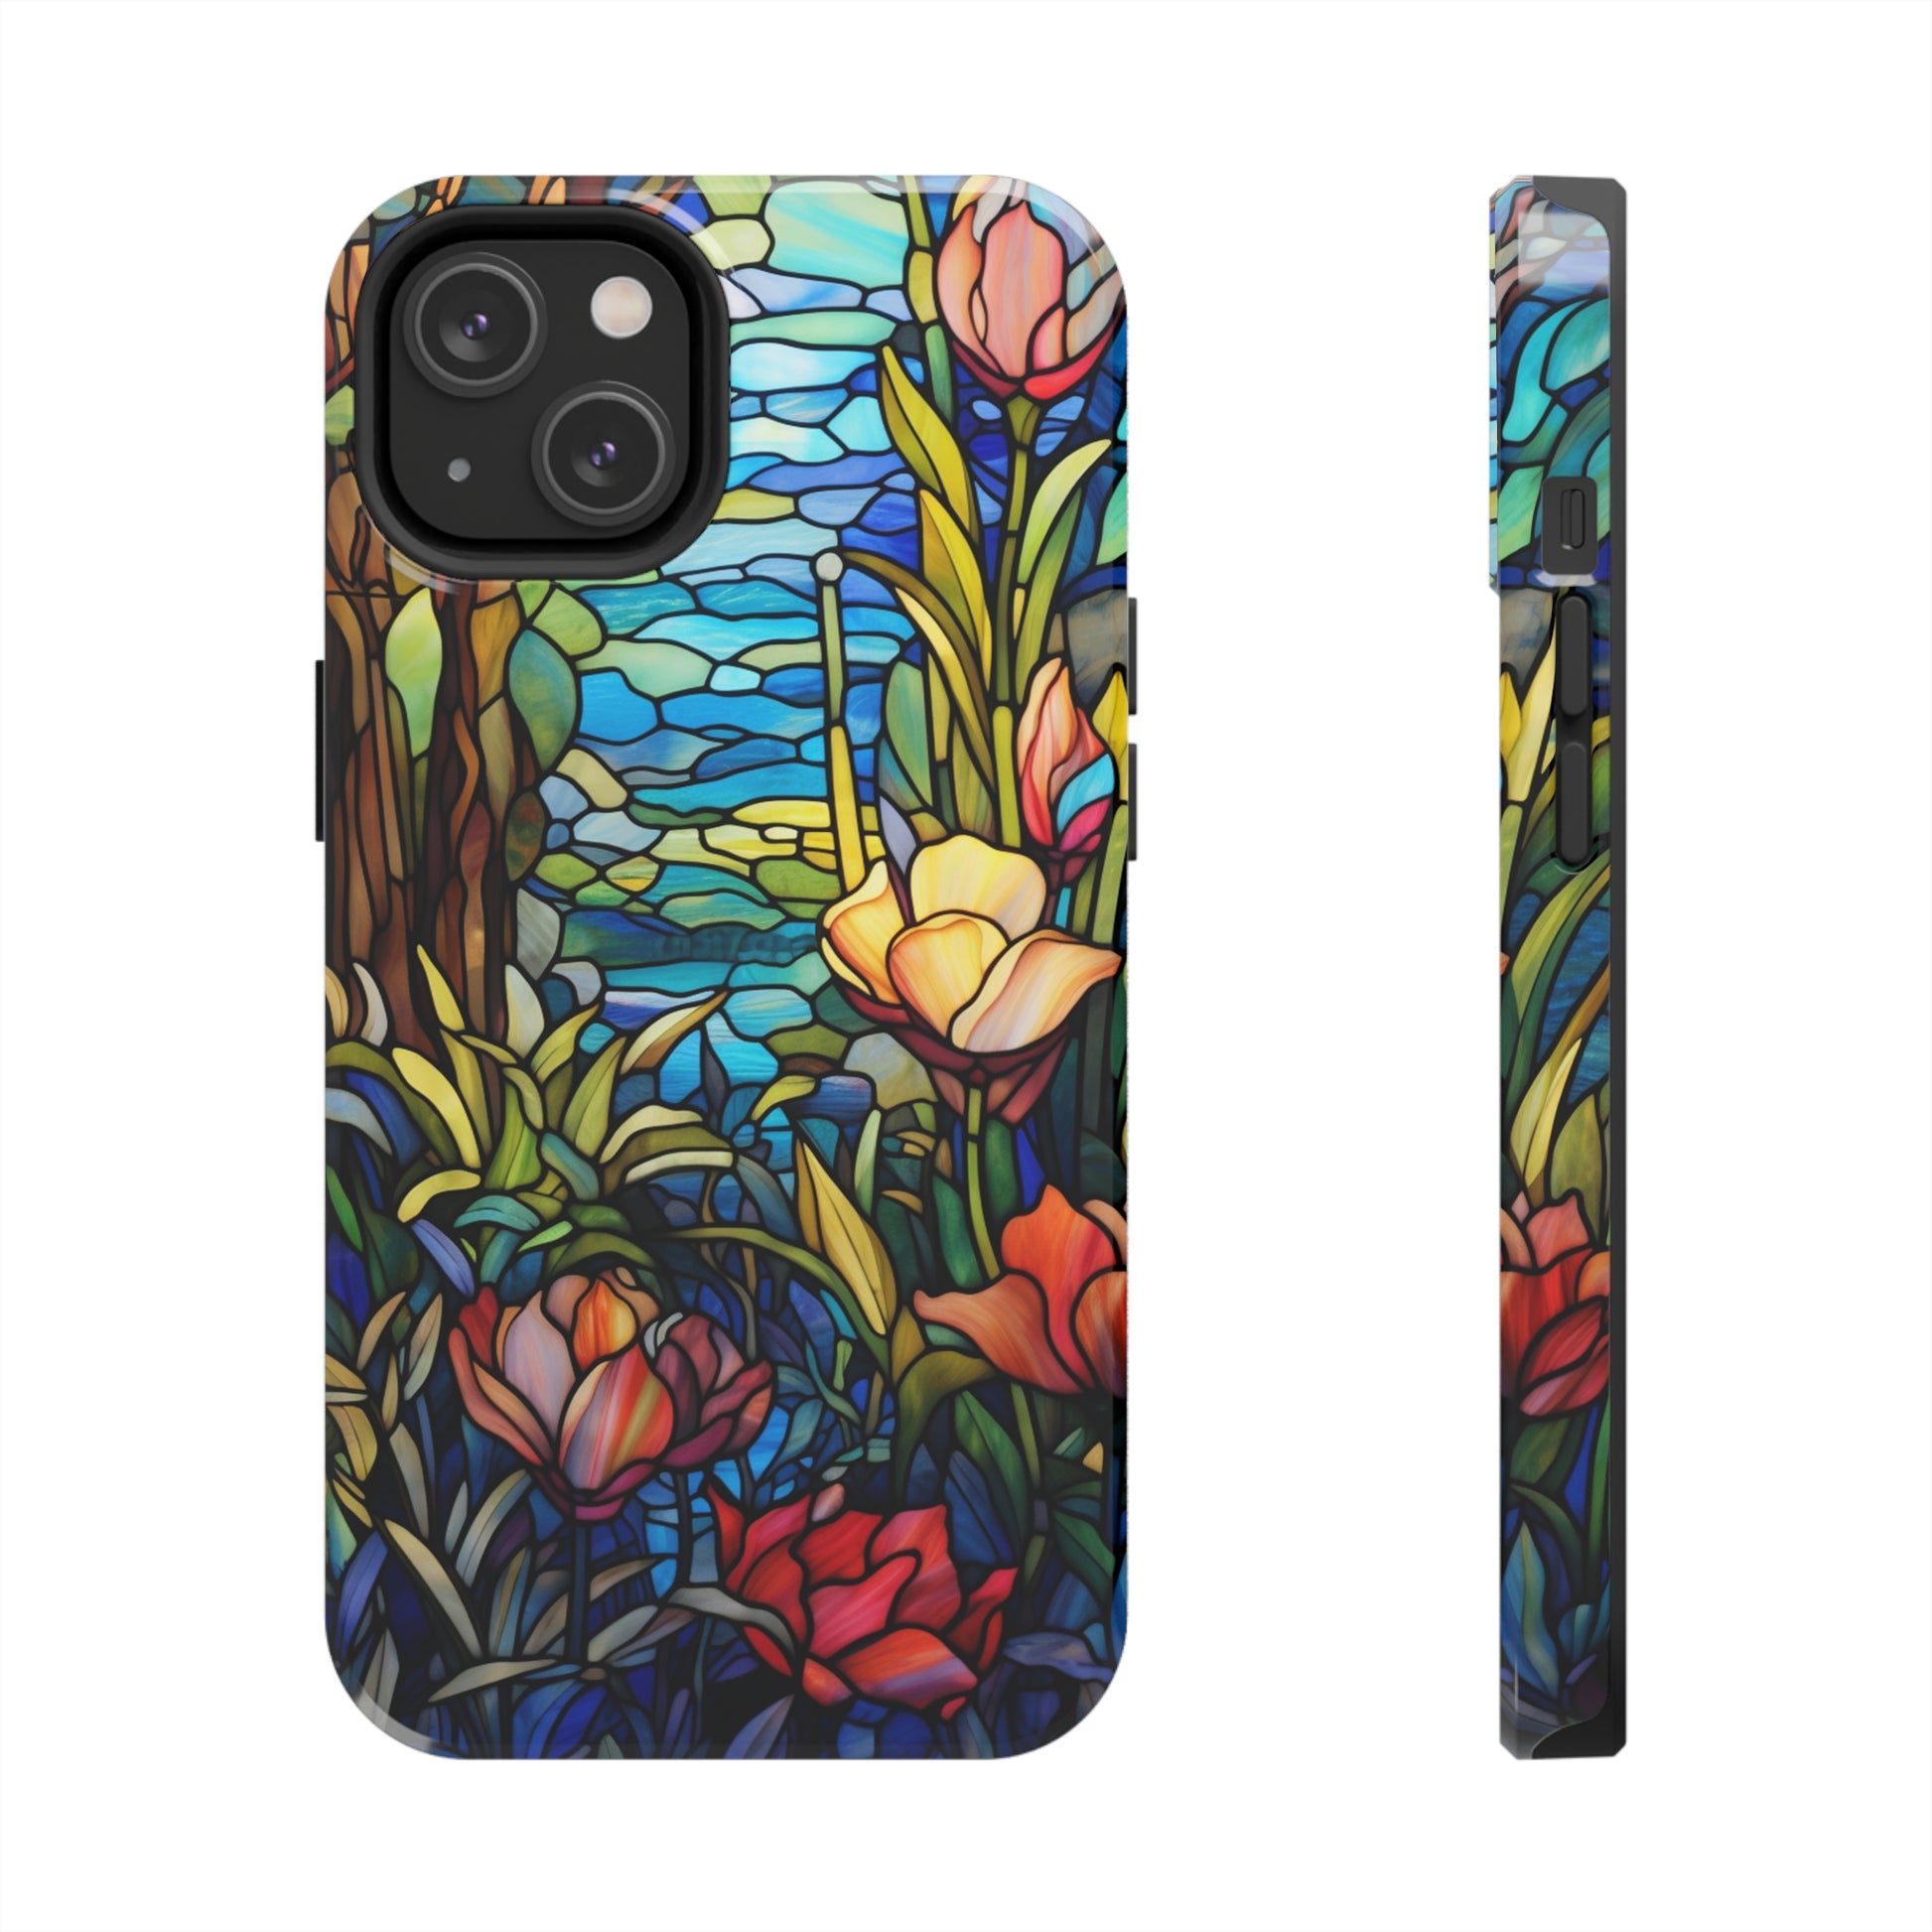 Durable Tough Case with Stained Glass and Floral Design